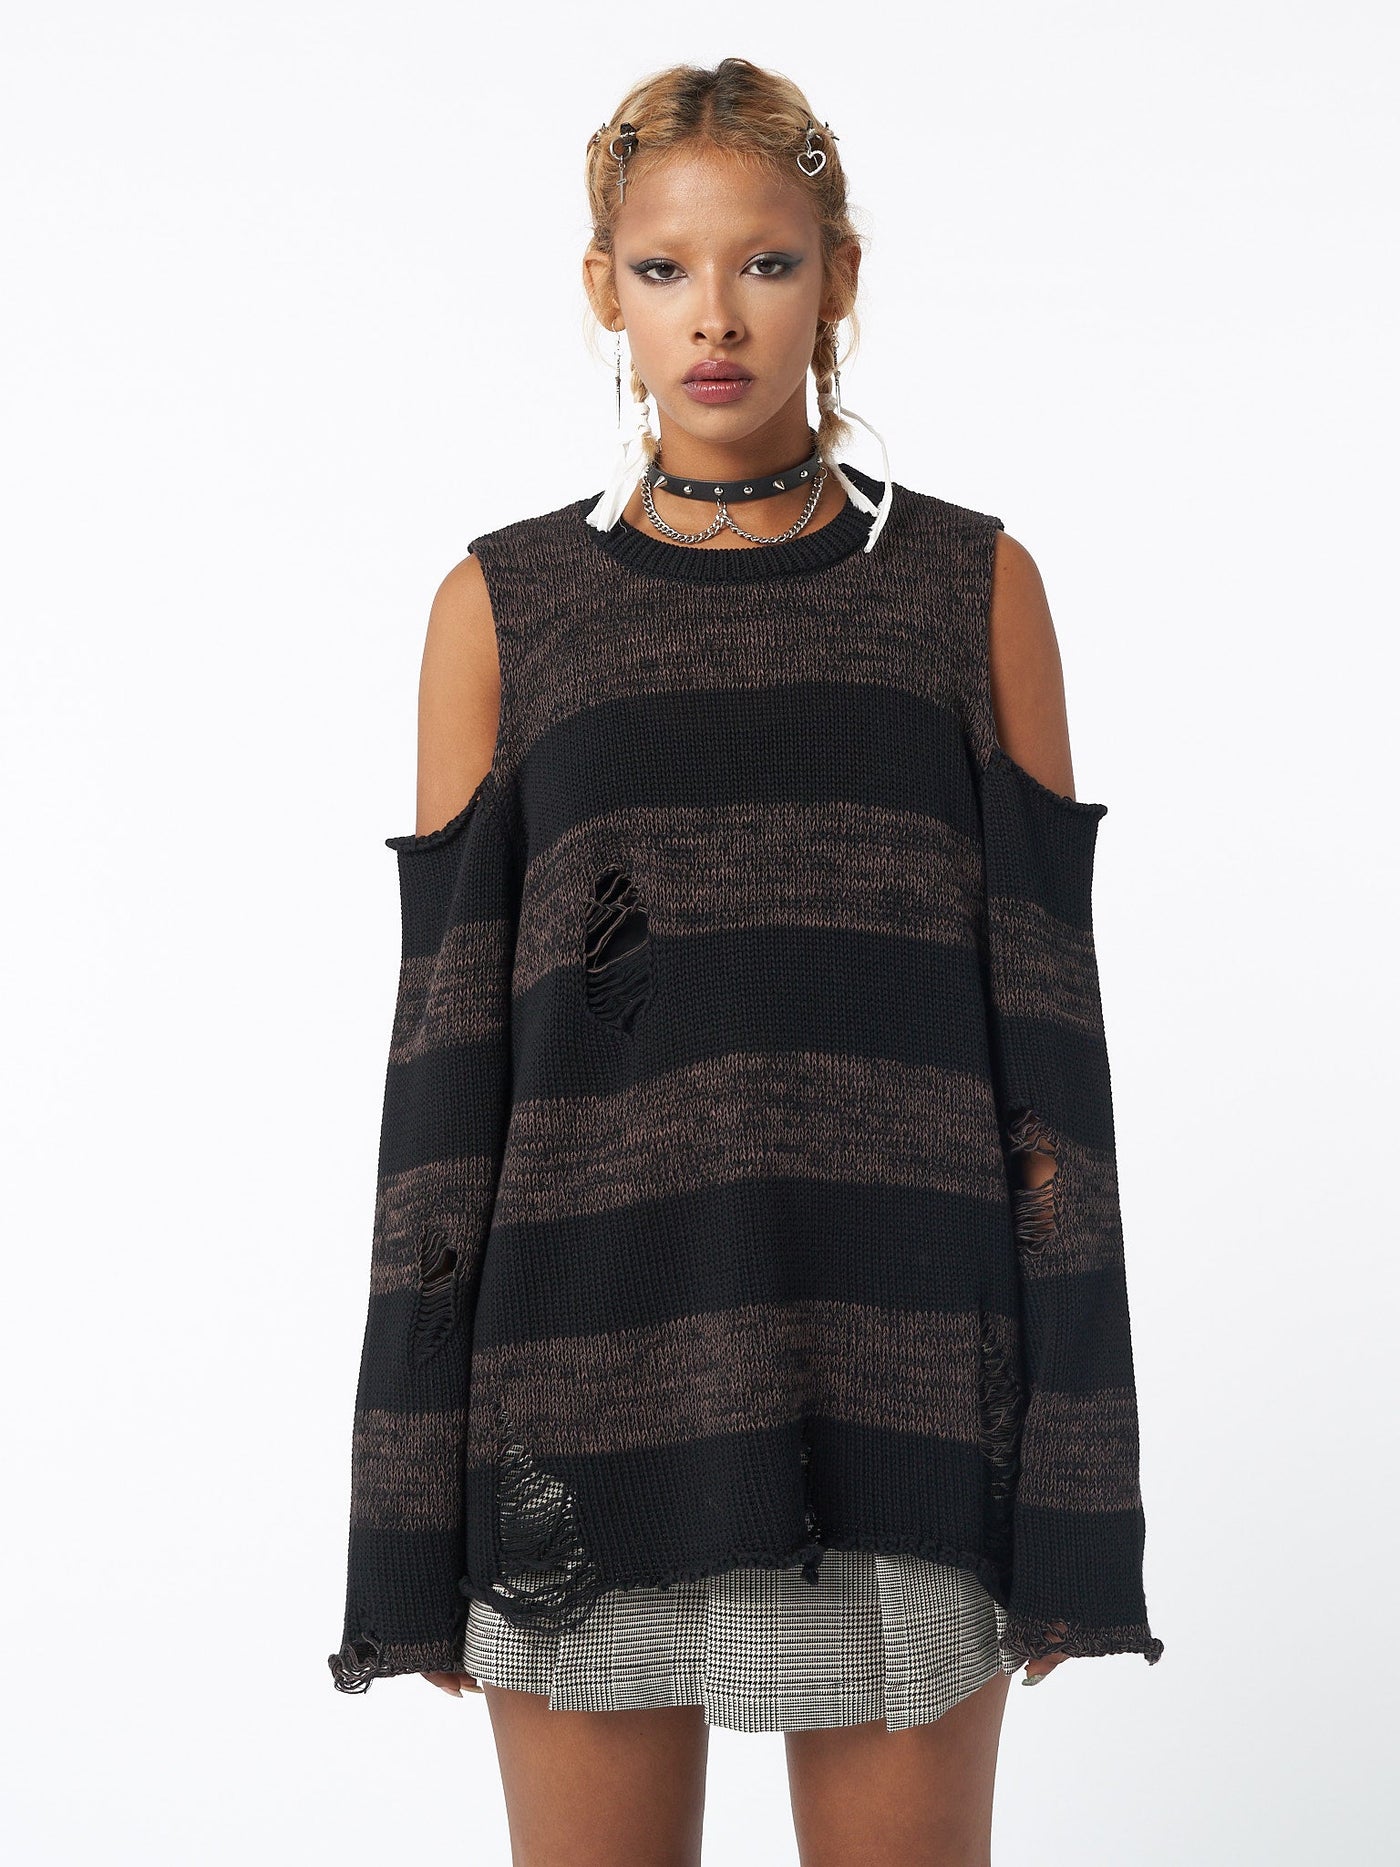 Cut-out shoulders knitted jumper with distressed details and stripes in brown and black